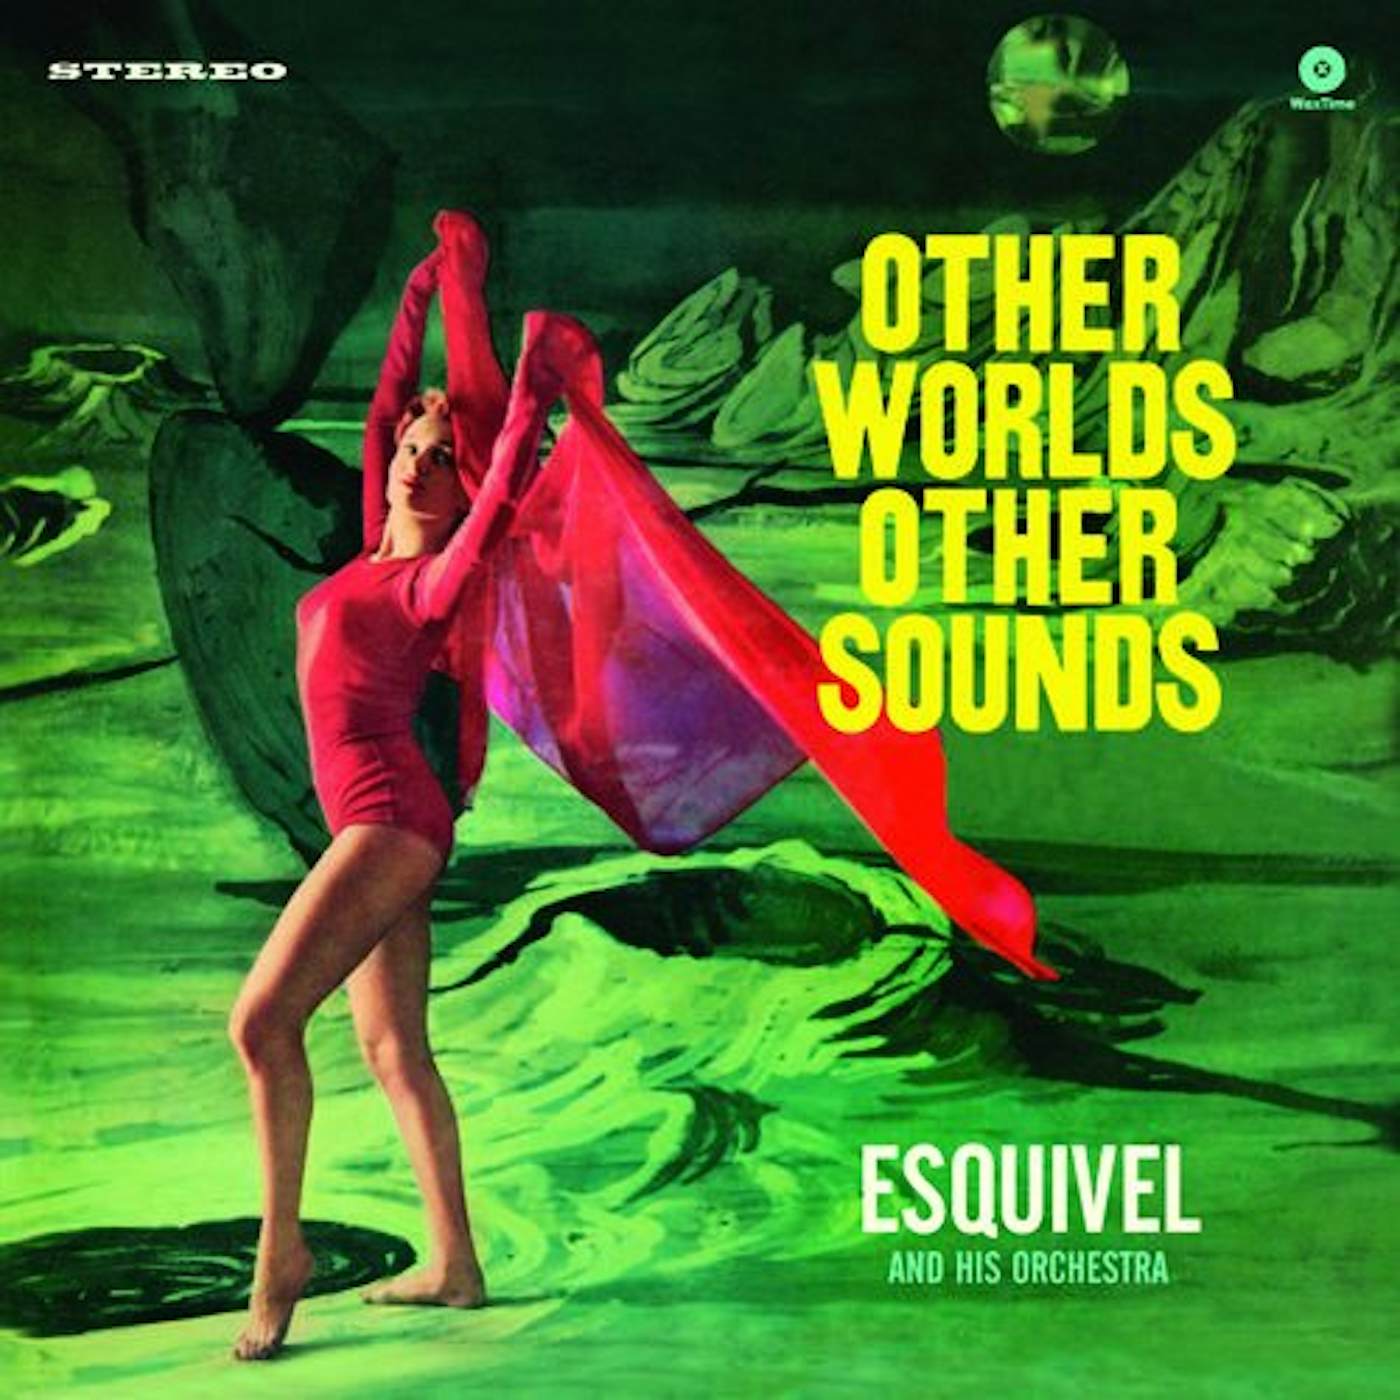 Esquivel & His Orchestra OTHER WORLDS OTHER SOUNDS (BONUS TRACK) Vinyl Record - 180 Gram Pressing